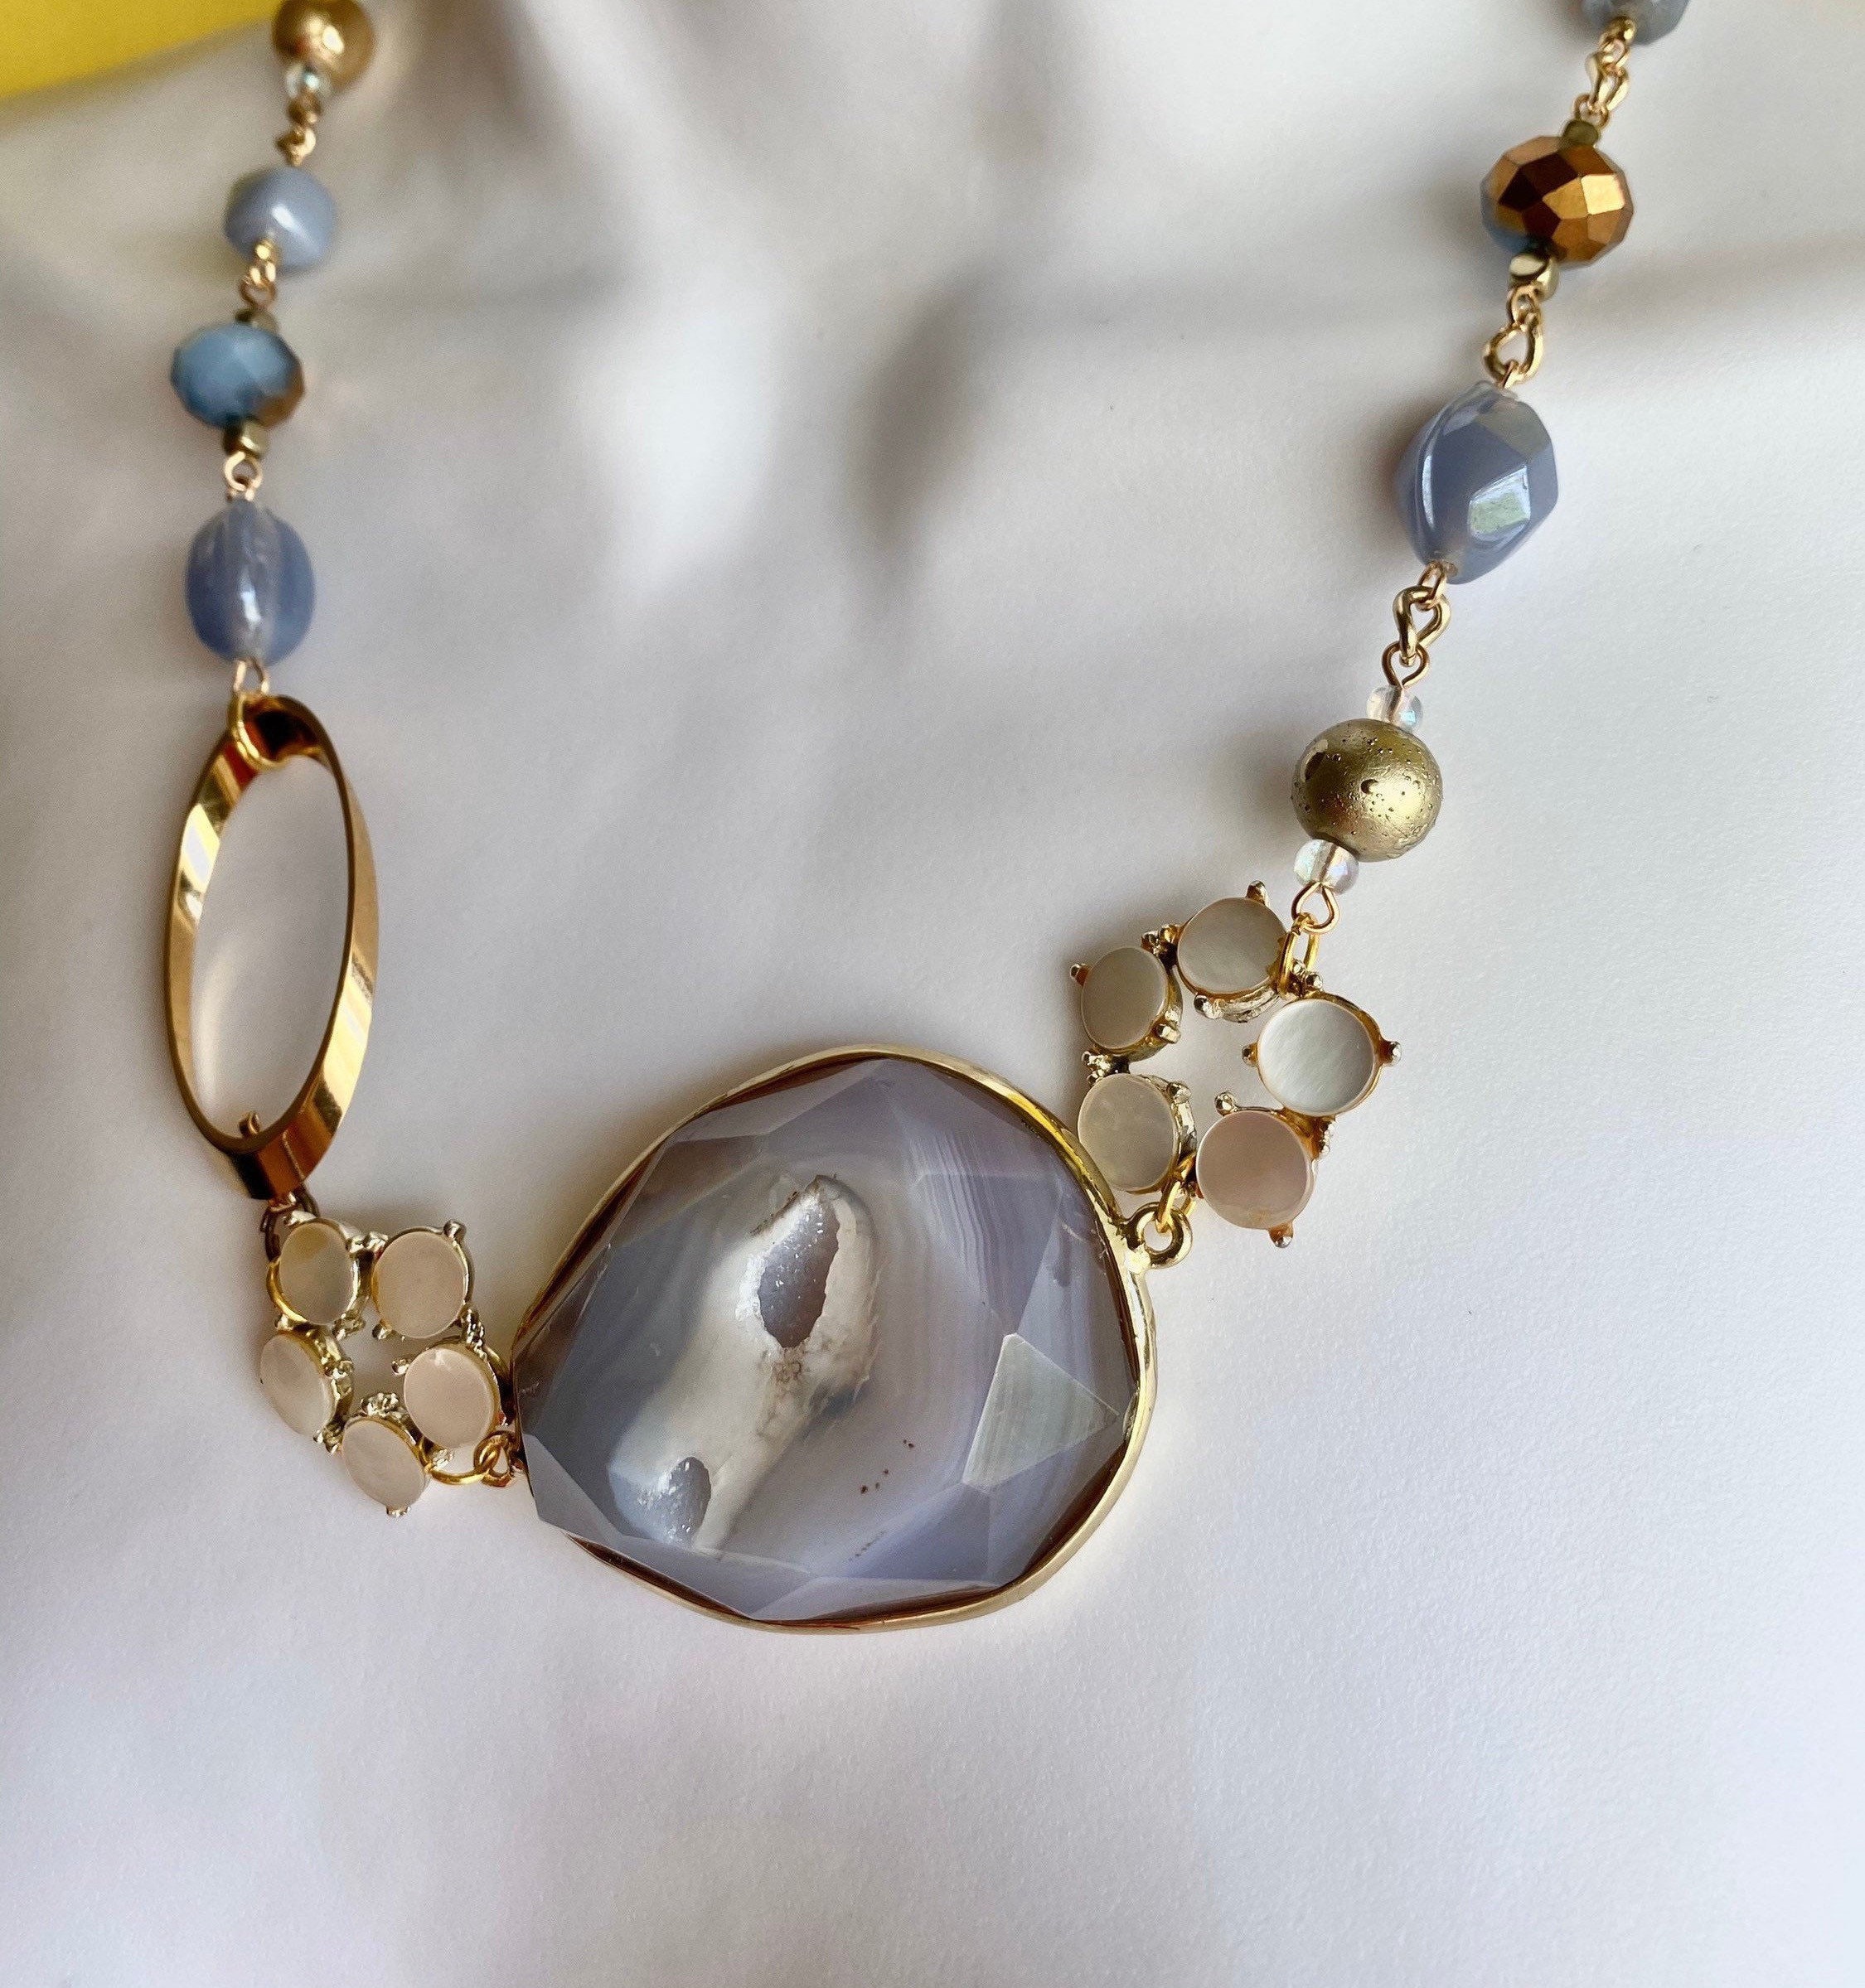 Lavender and Gold Stone Necklace Made From Recycled Jewelry - Etsy